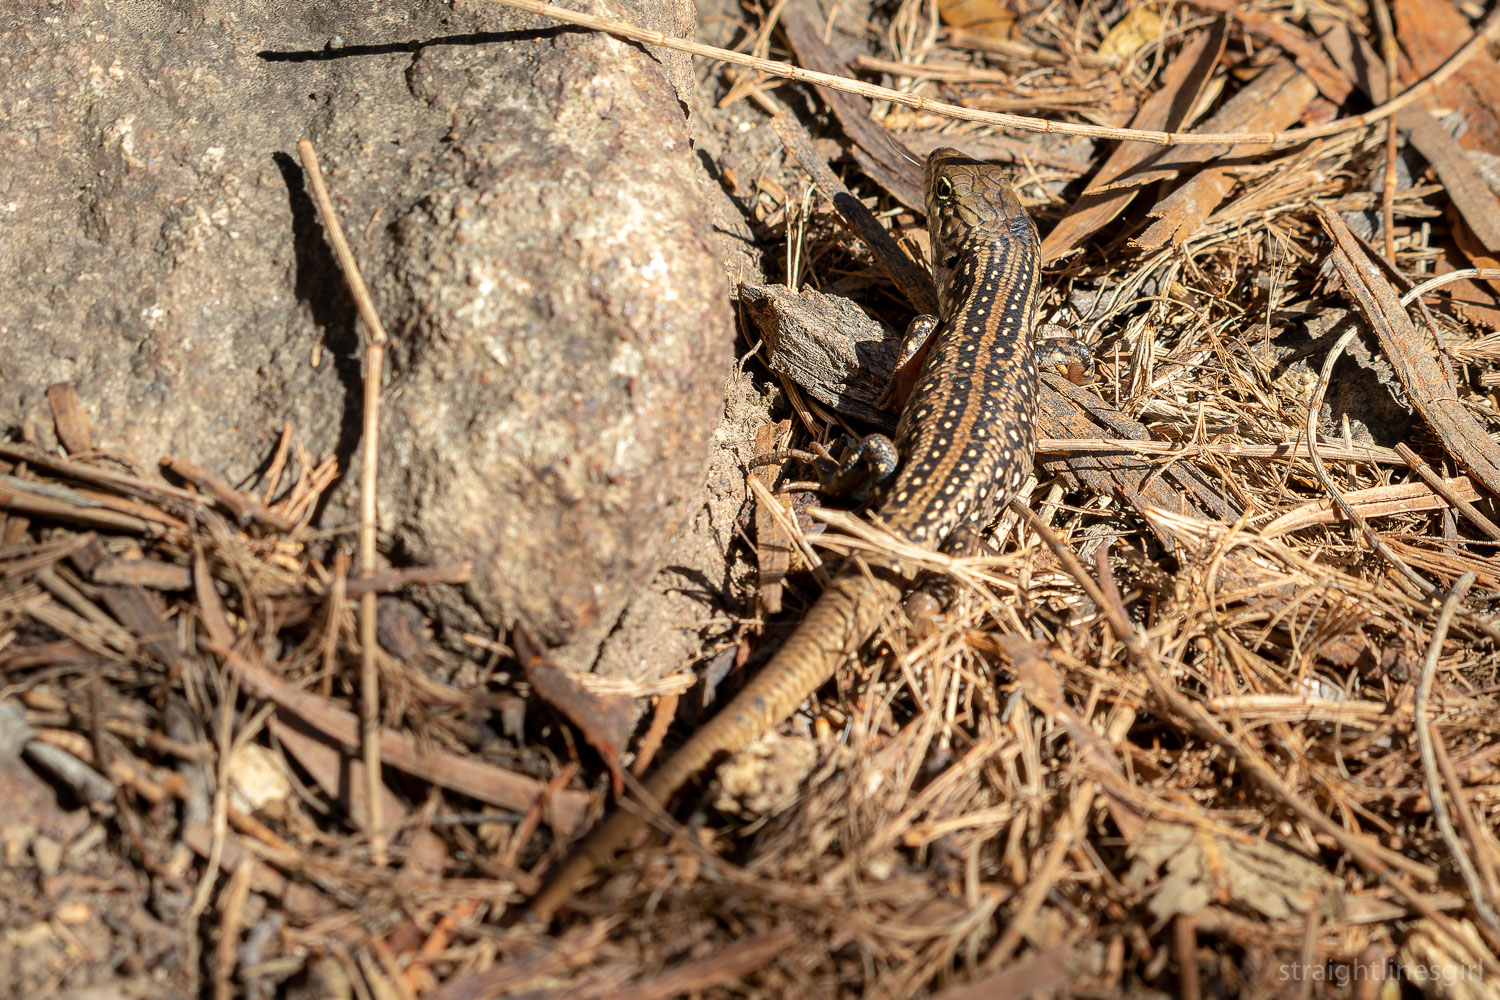 A small spotted brown lizard on a rock and tree litter